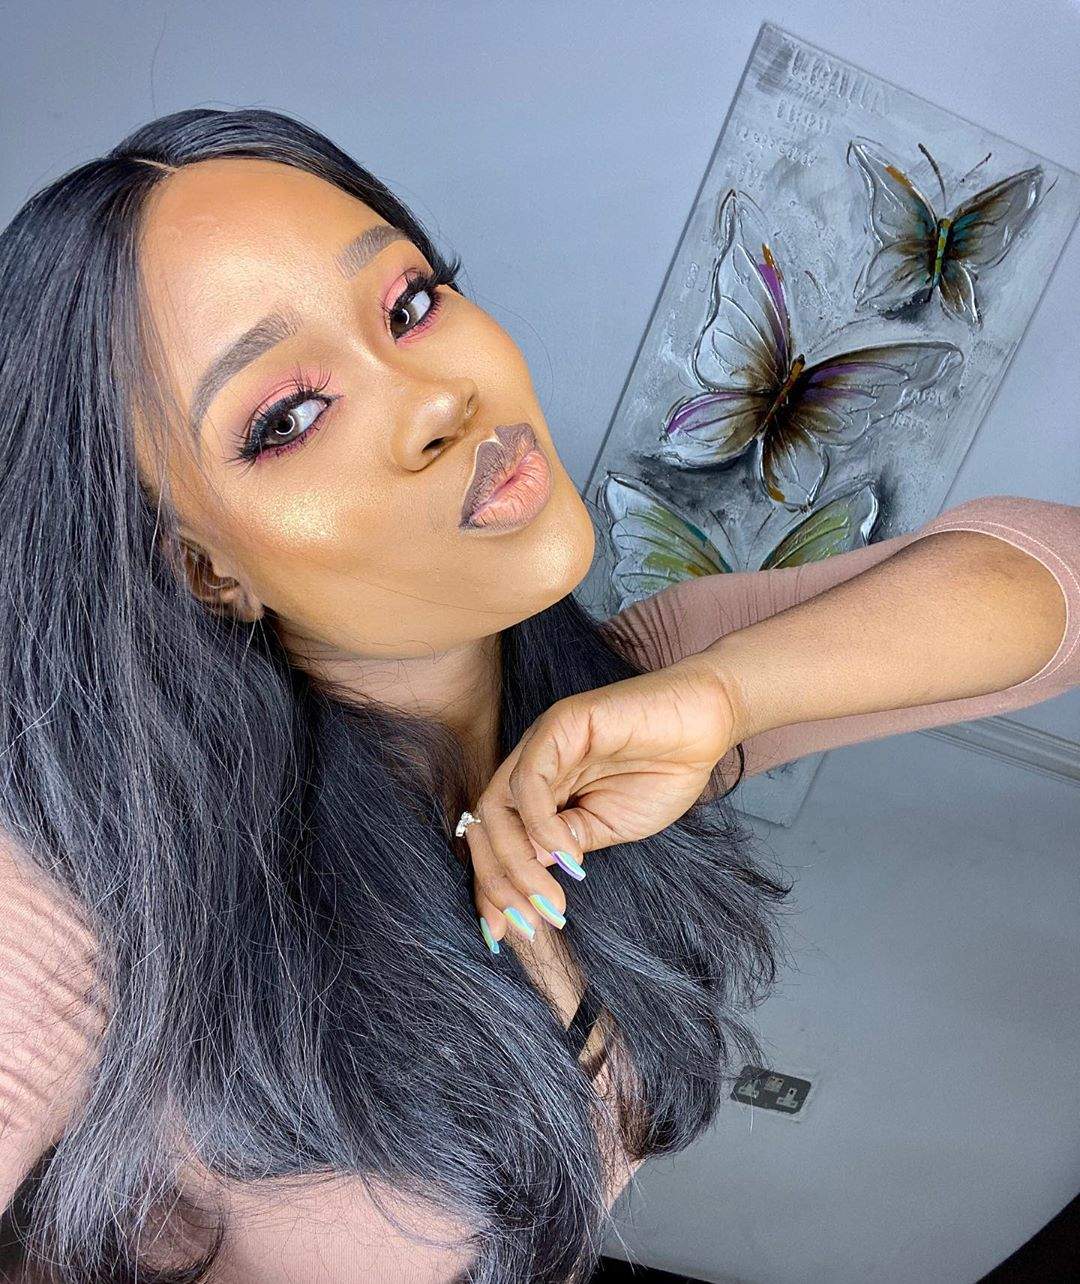 'Coronavirus Pandemic Period Is A Blessing' - BBNaija's Ceec Reveals Why She Loves The Outbreak